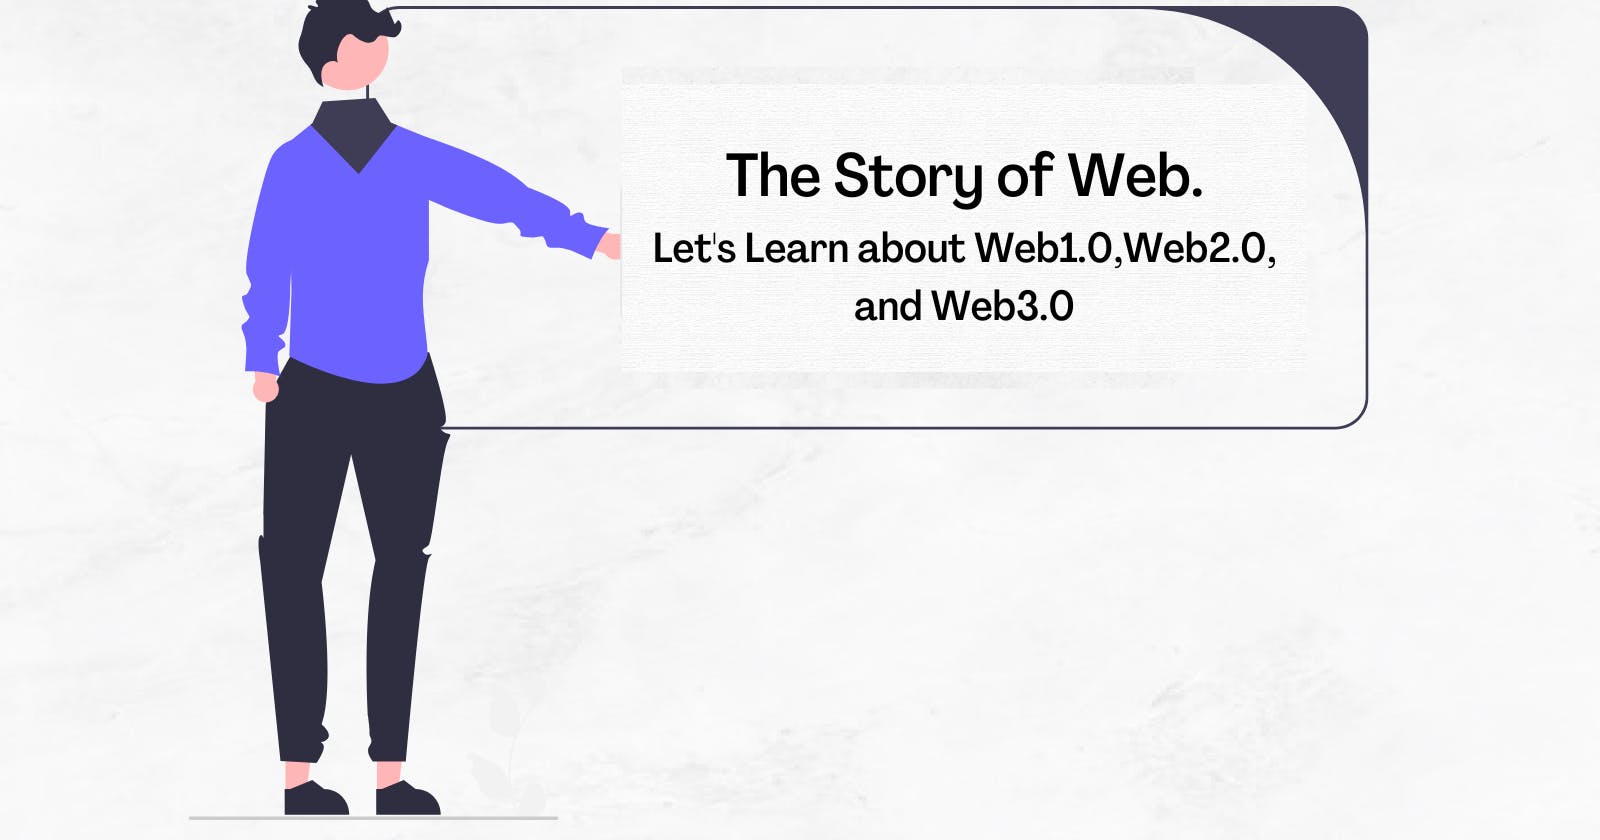 The Story of Web.
Let's Learn about Web1.0,Web2.0 and Web3.0